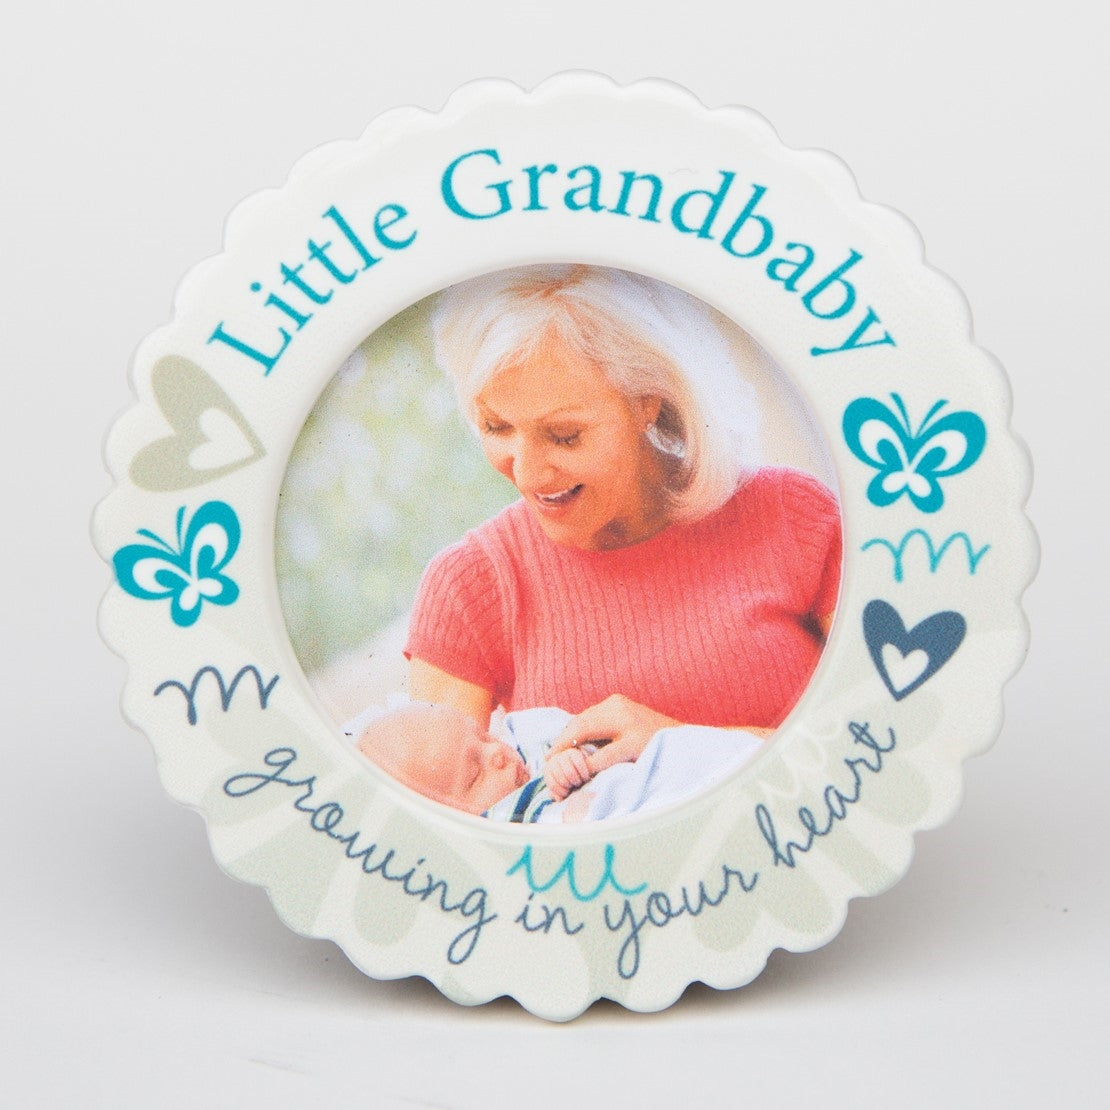 Ultrasound Ornament or Table Frame for Grandparents- Boxed with Scripture